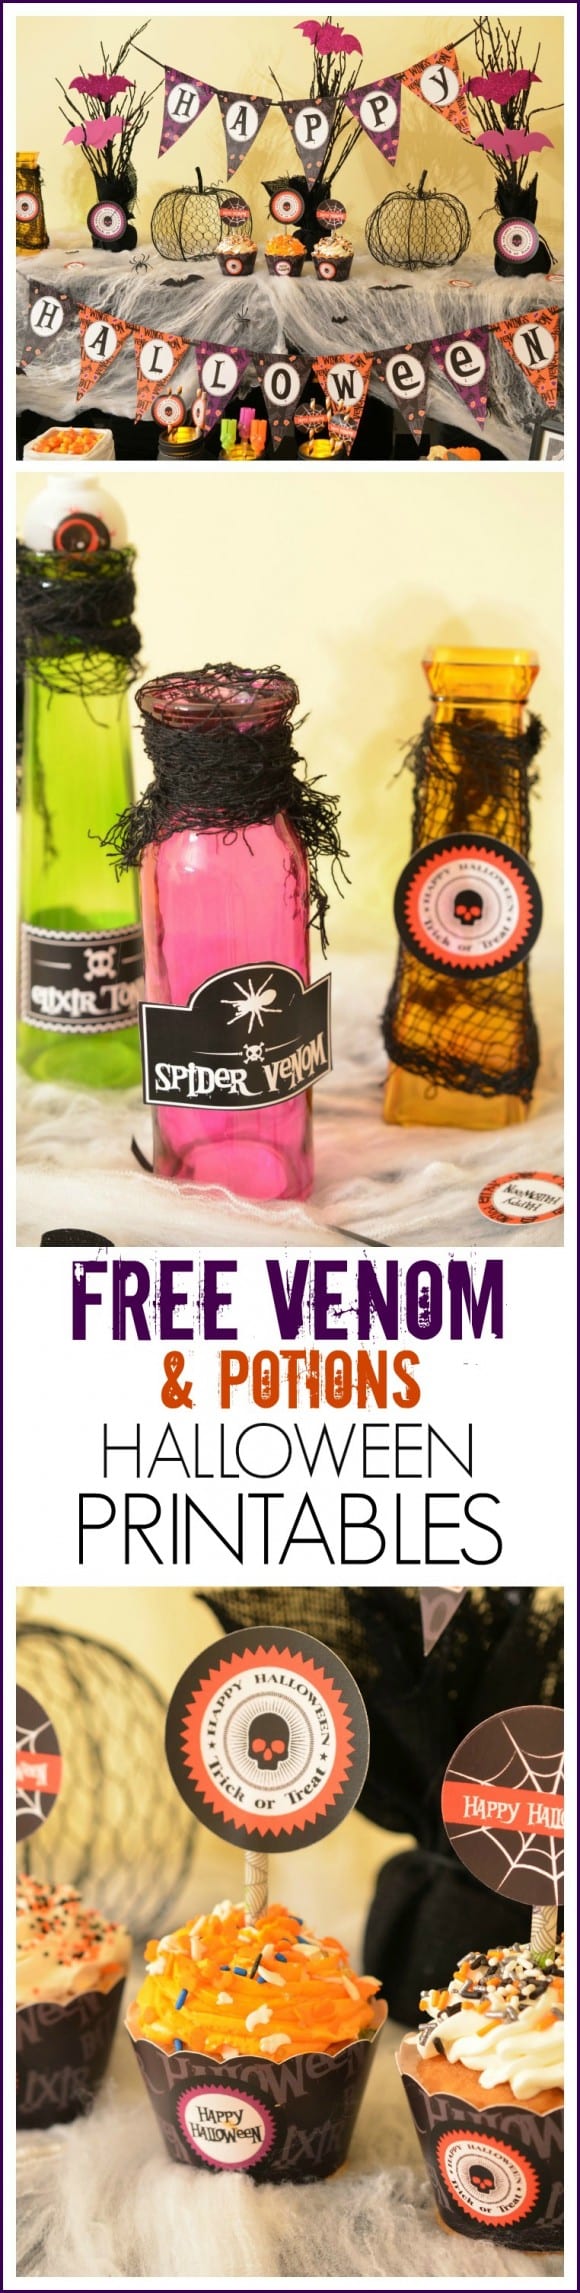 Venom & Potions Free Halloween Party Printables -- all the decorations you need for your Halloween party! See more Halloween party ideas at CatchMyParty.com!